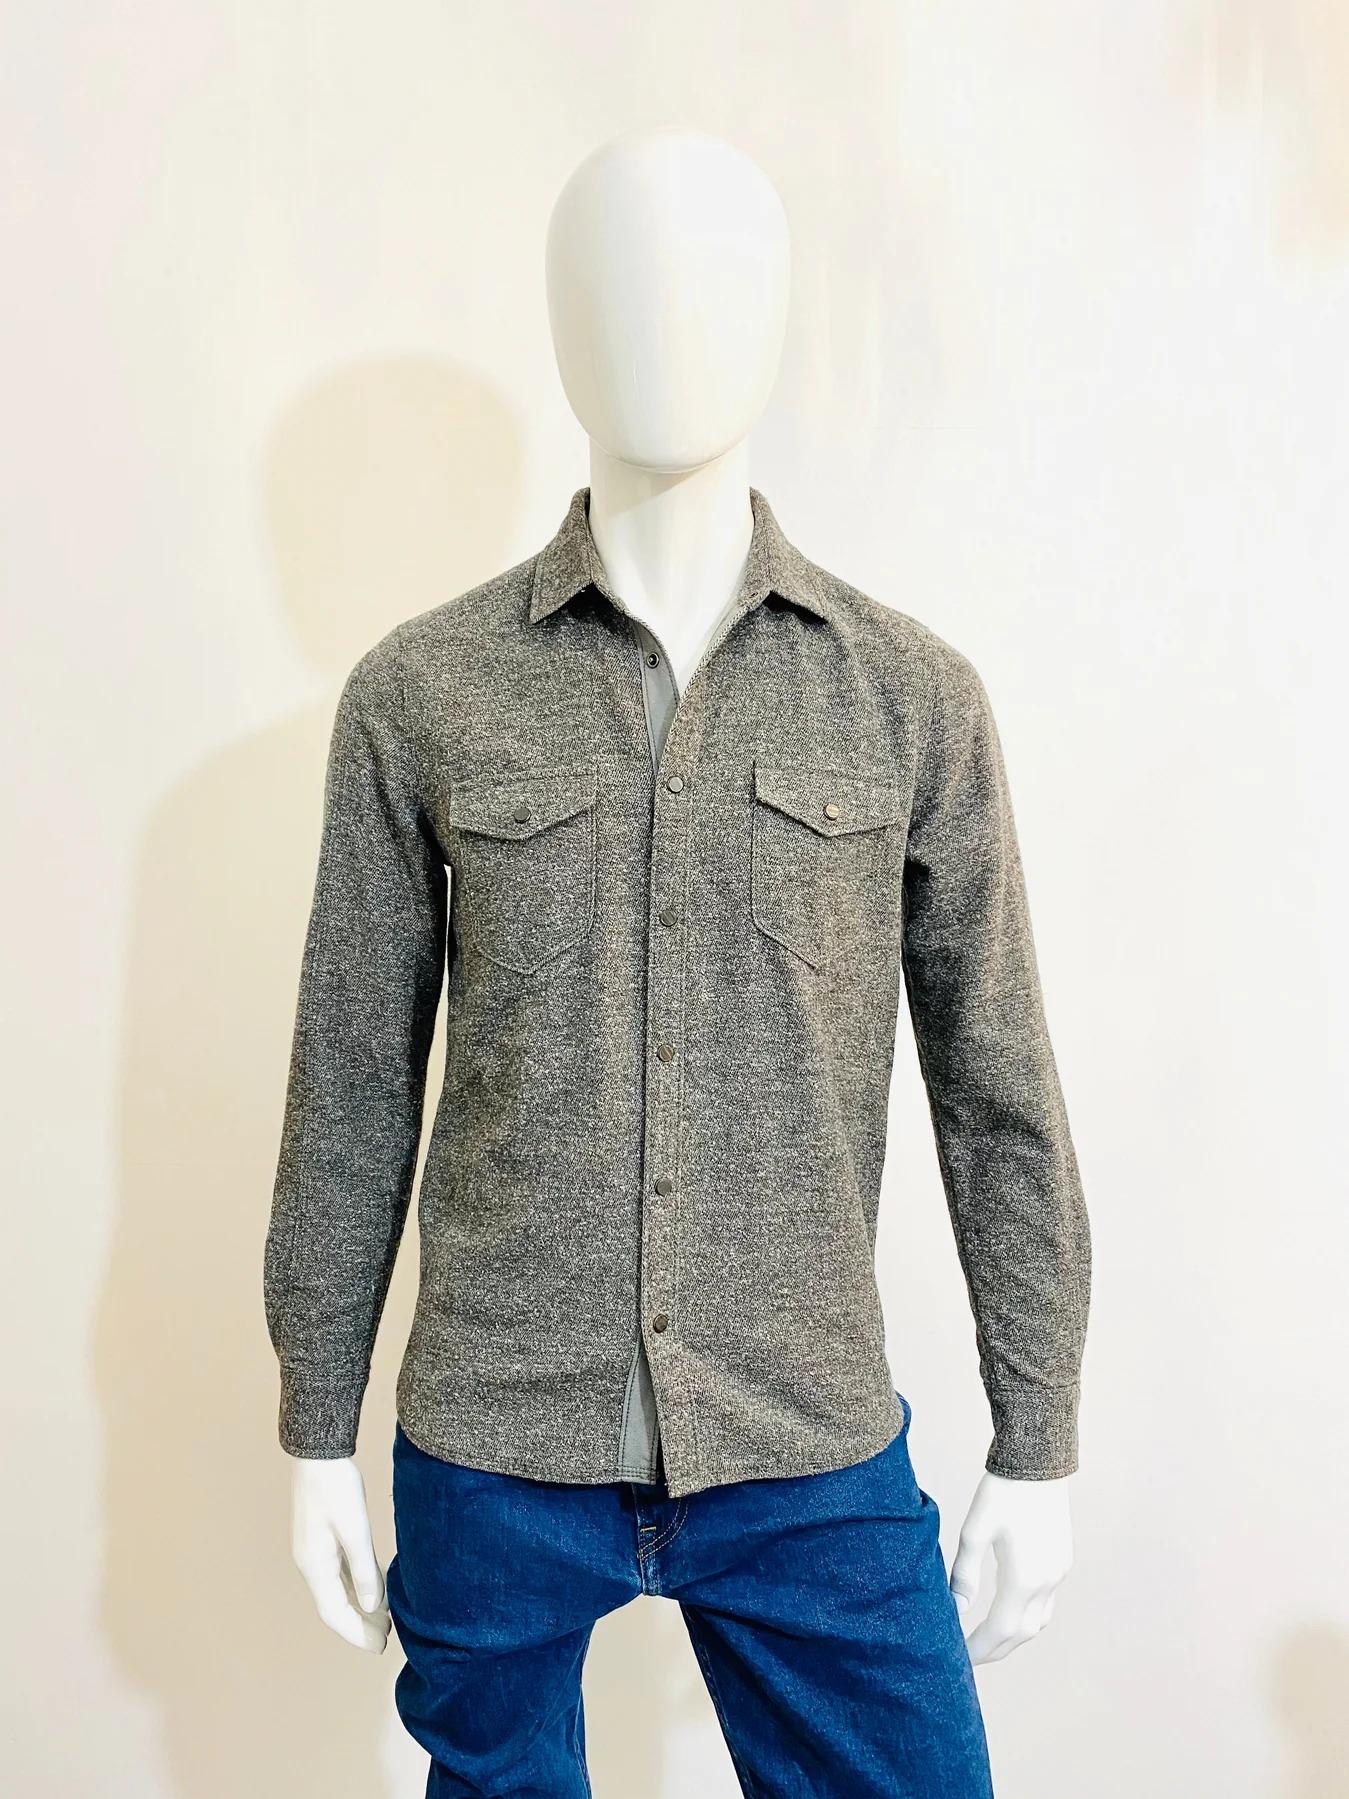 ATM -Anthony Thomas Melillo Shirt

55% cotton long sleeve shirt, with grey marble style press stud 
closure to the front and cuffs.

Additional information:
Size – S/P
Composition - Cotton
Condition – Very Good